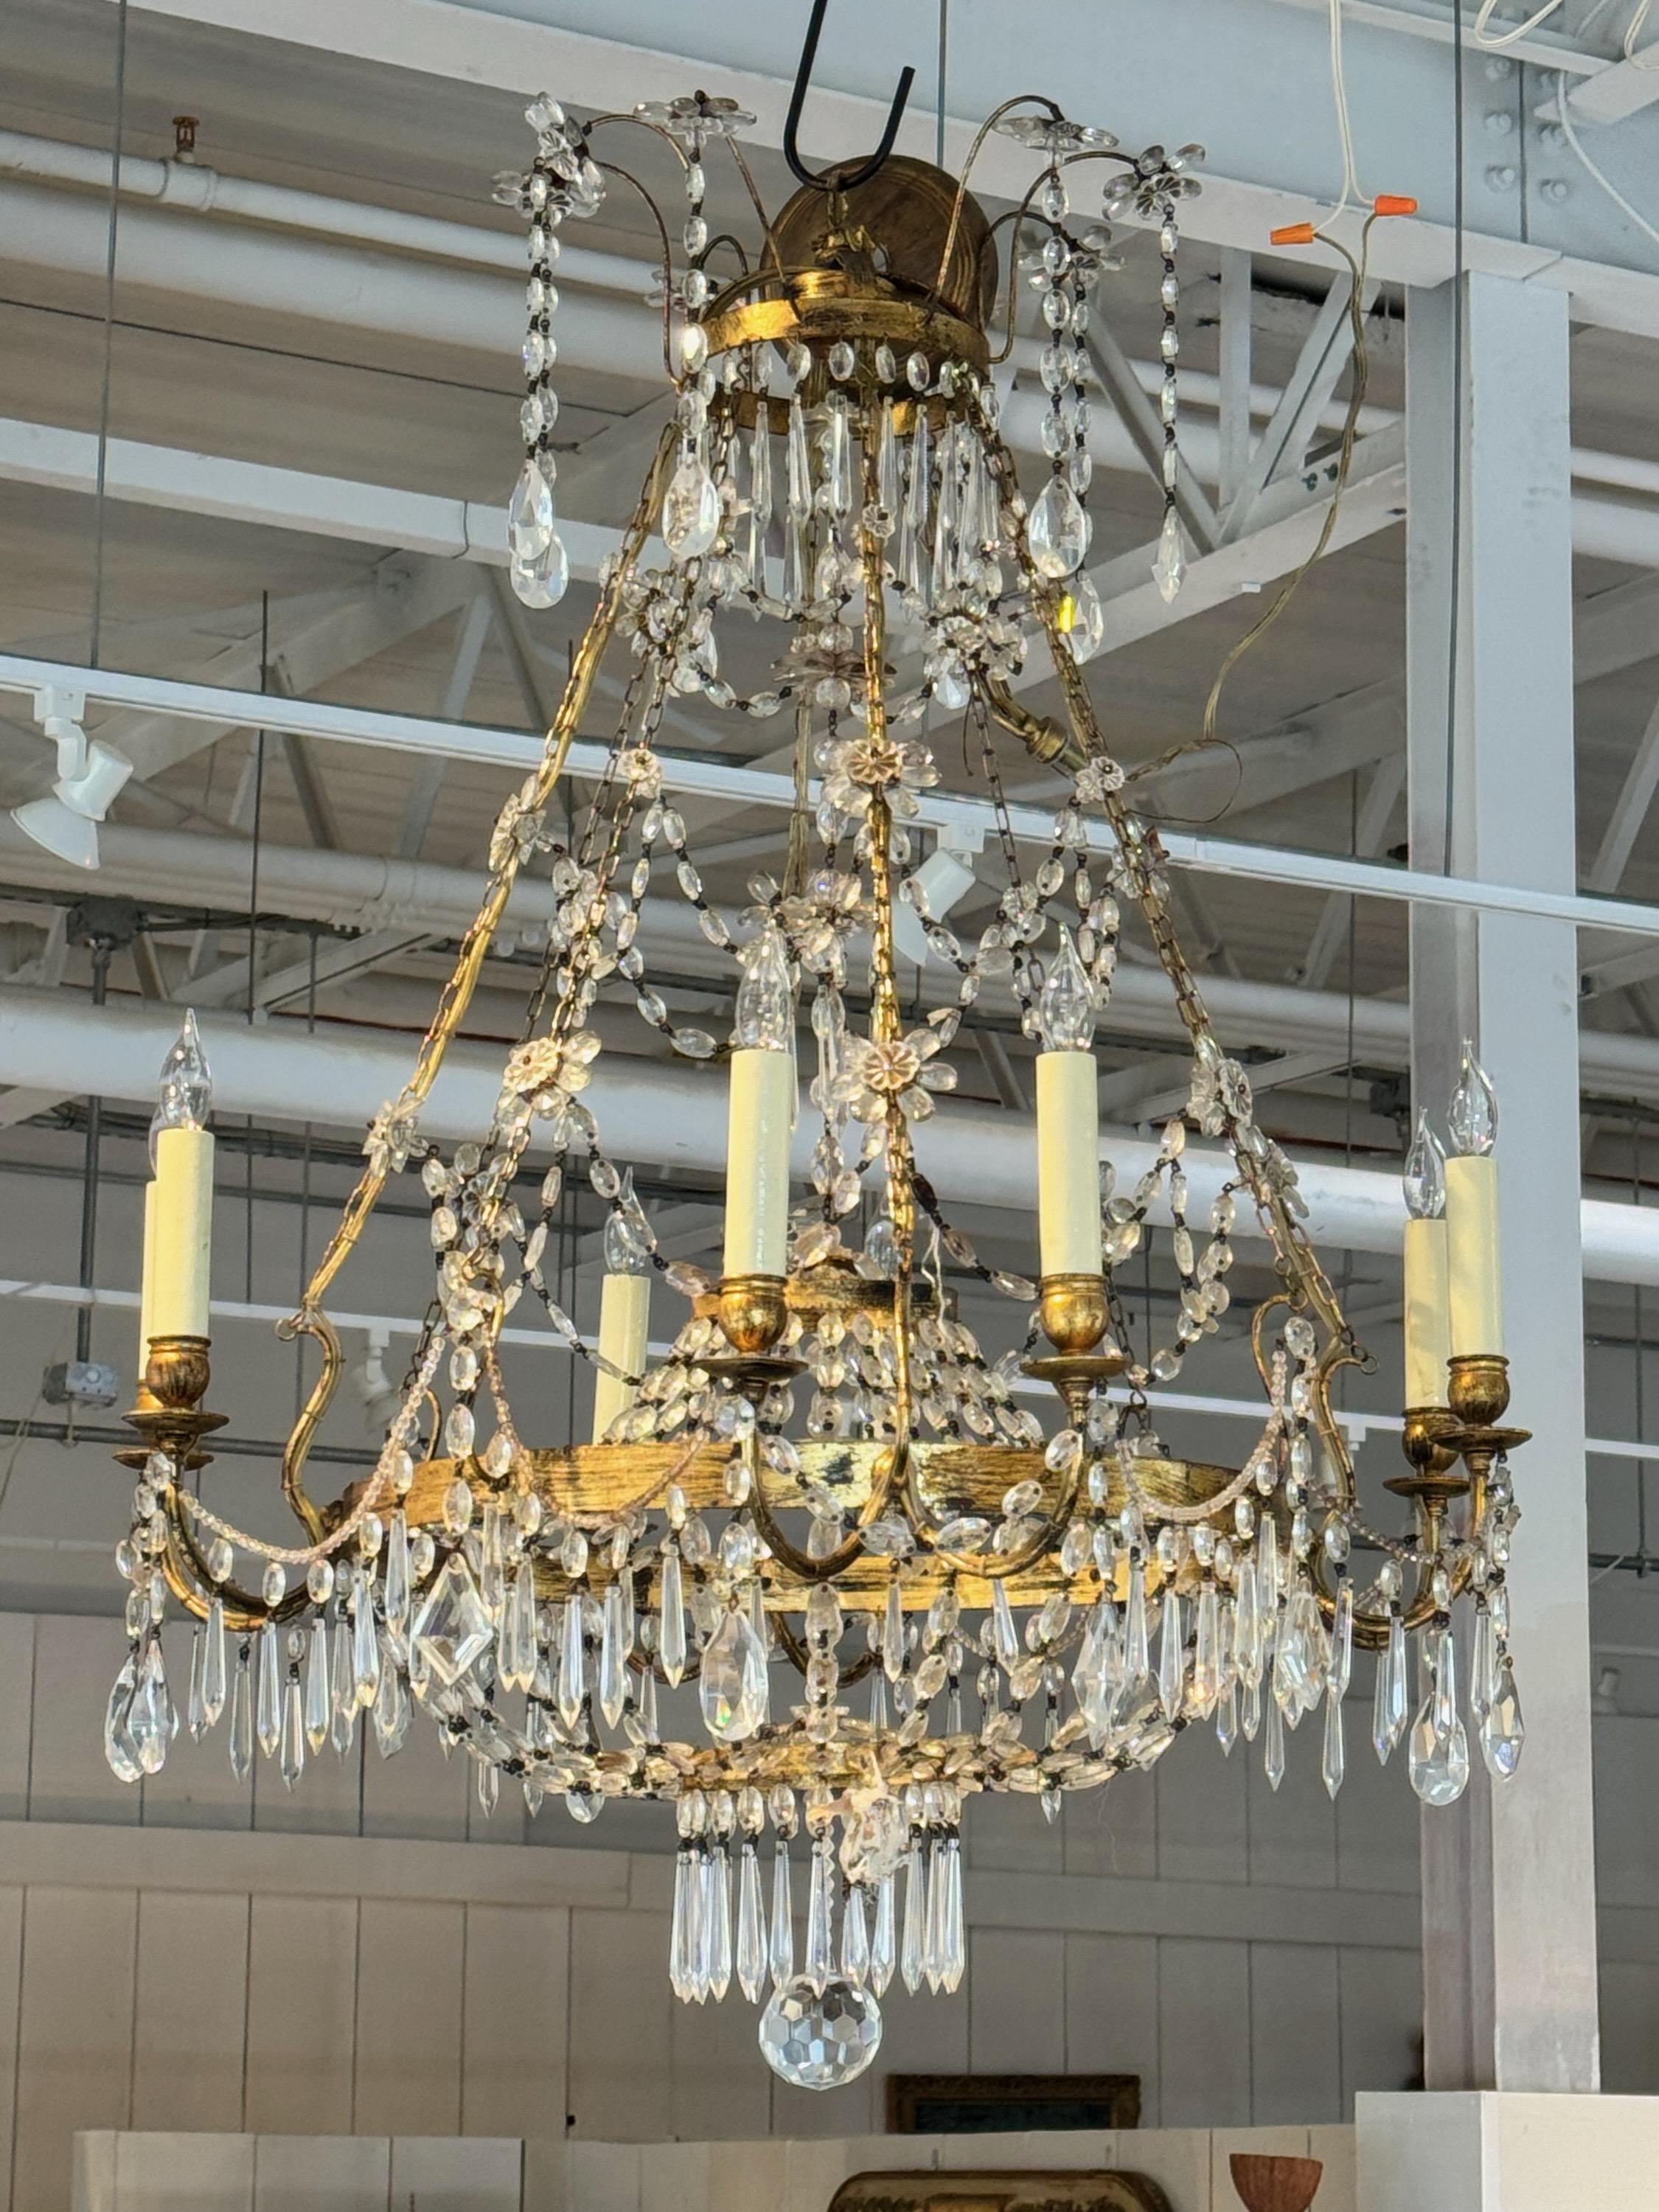 This is a stunning Swedish Chandelier. Imagine it in your dining room.